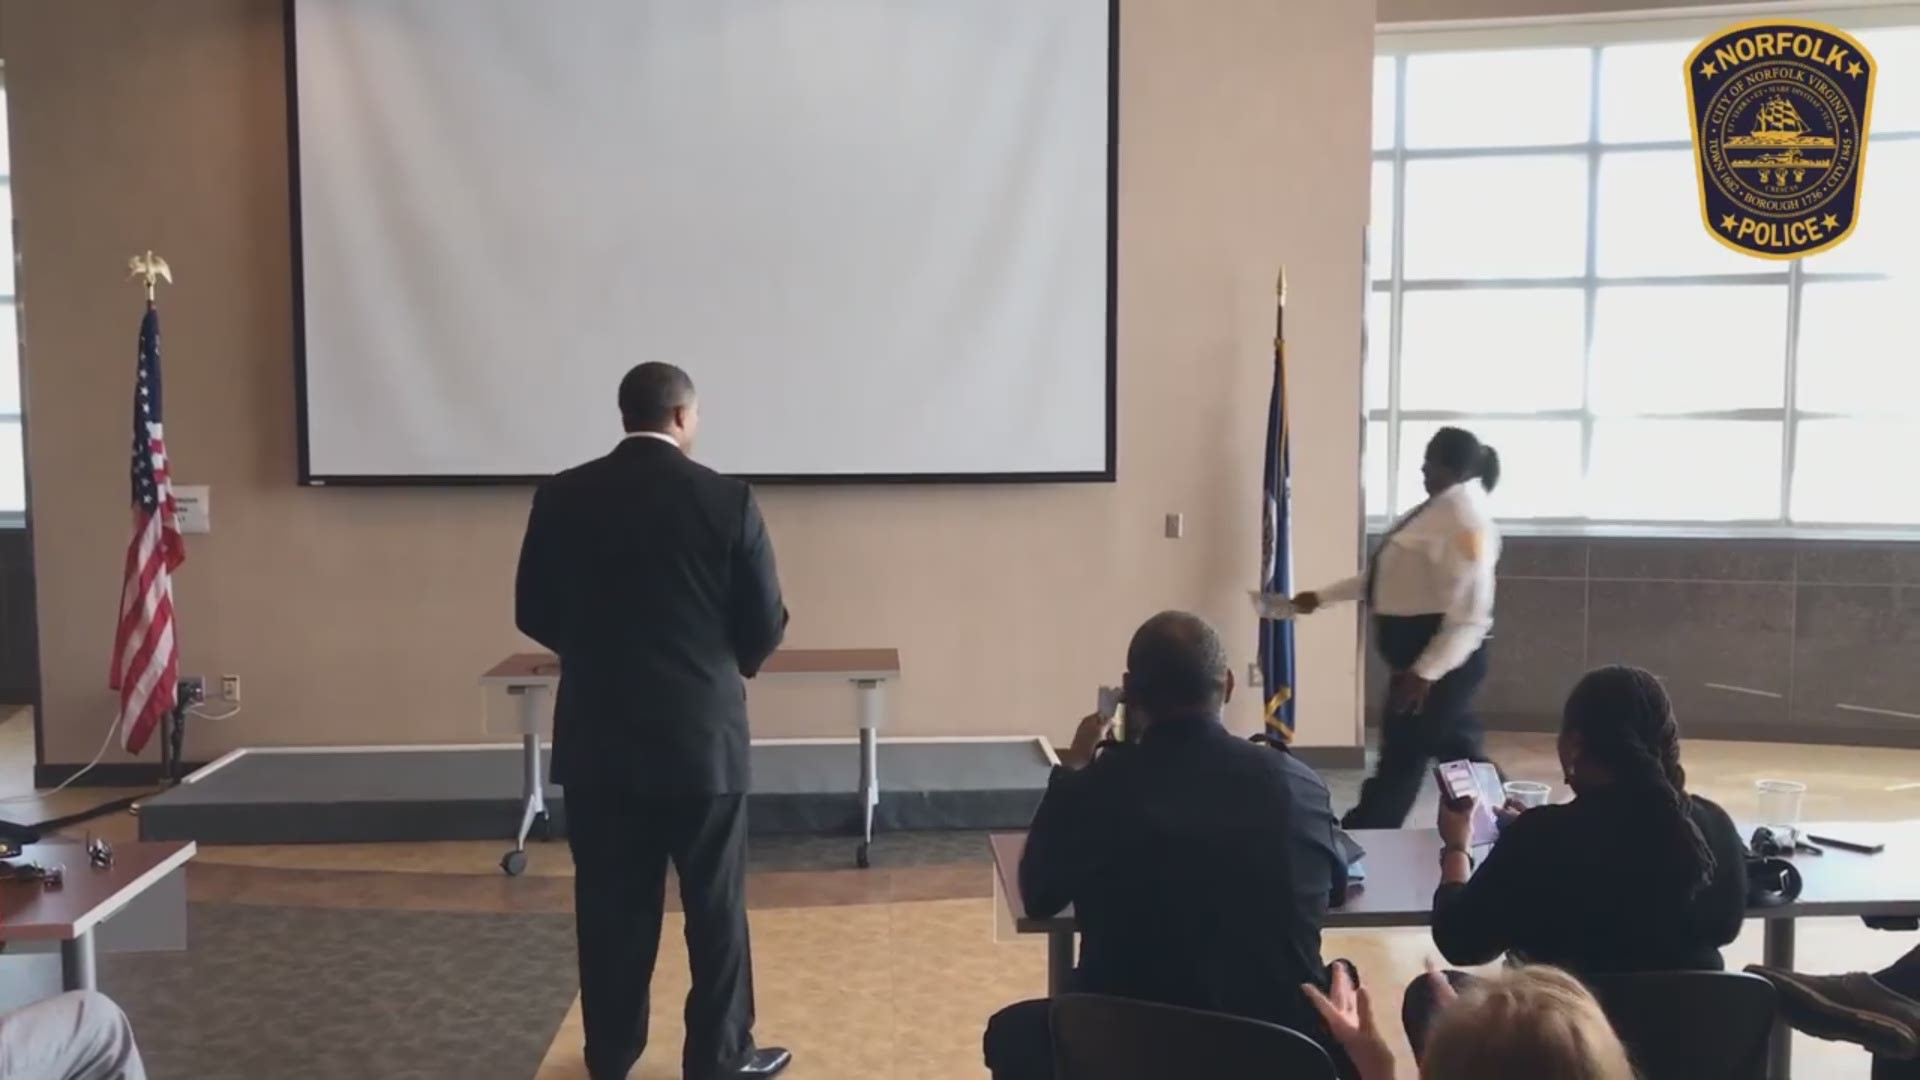 Chief Larry D. Boone promoted Norfolk PD's first African-American female police Captain, Michele Naughton. This is a milestone in the 222 year history of the Norfolk Police Department. (Video from Norfolk Police Department)